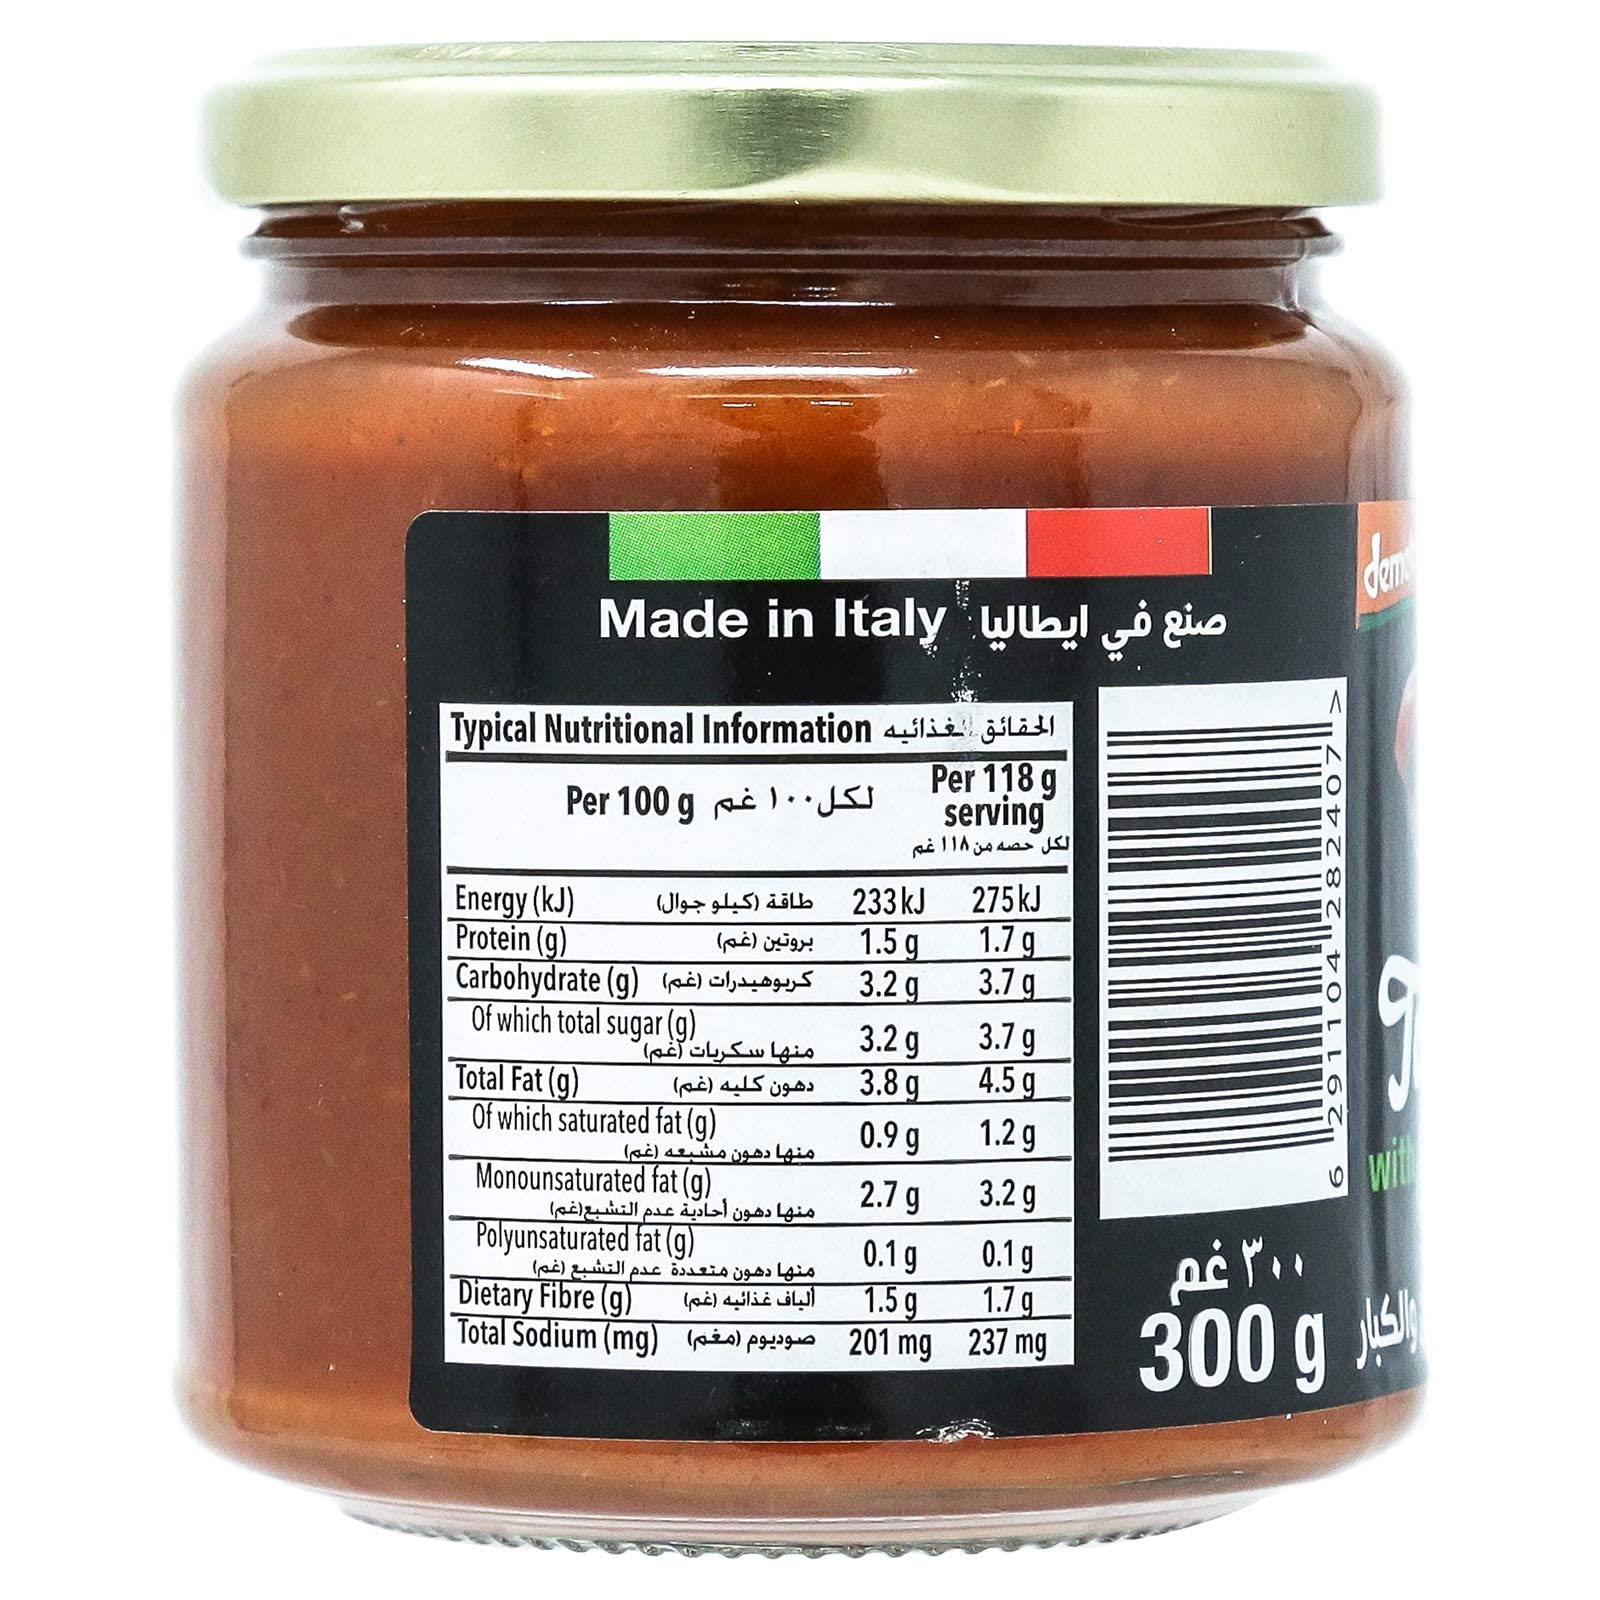 ORGANIC LARDER Tomato Sauce With Olive & Capers, 300g - Organic, Vegan, Natural